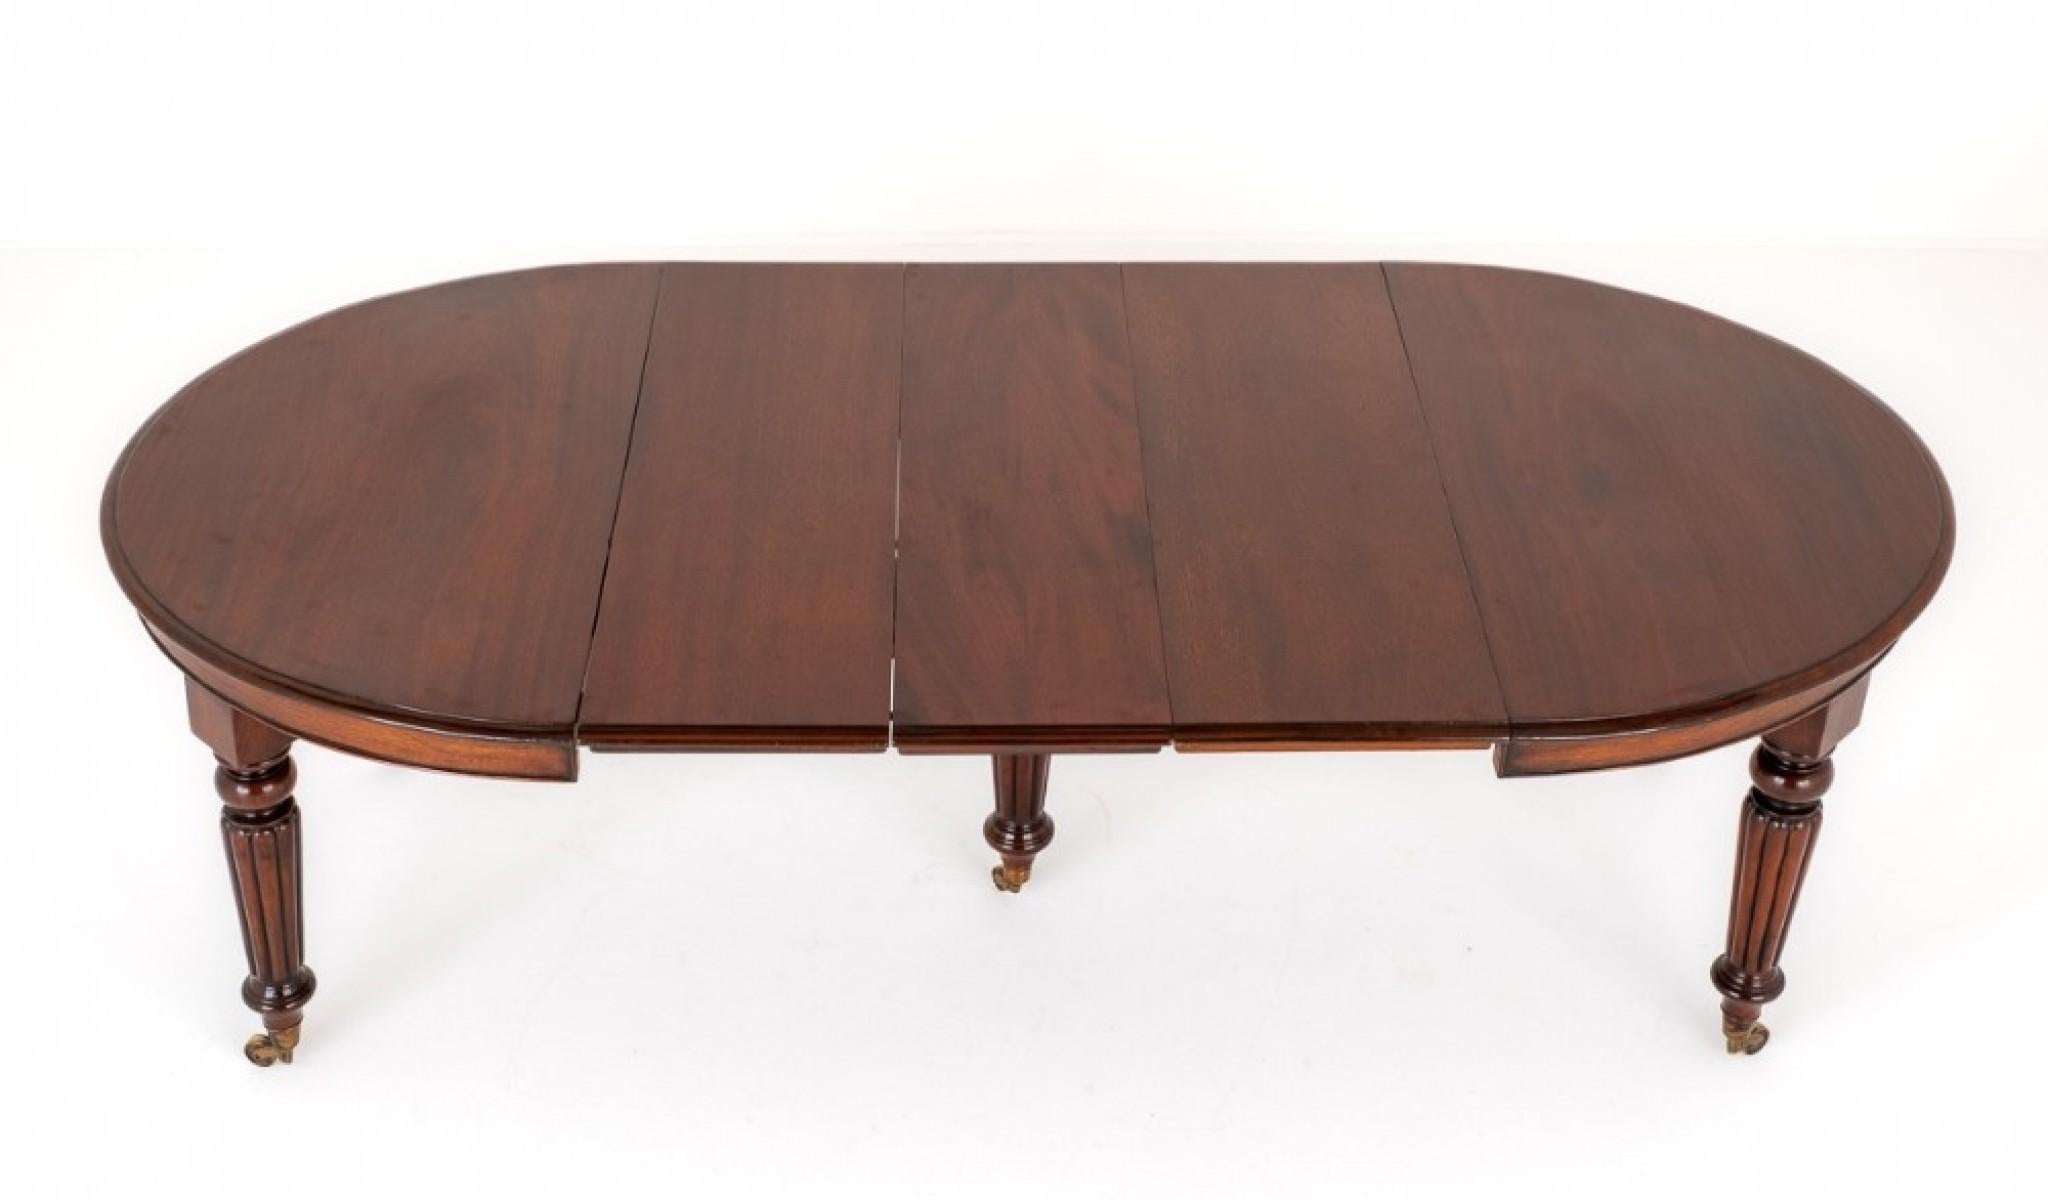 Late 19th Century William IV Dining Table Extending Mahogany 19th Century